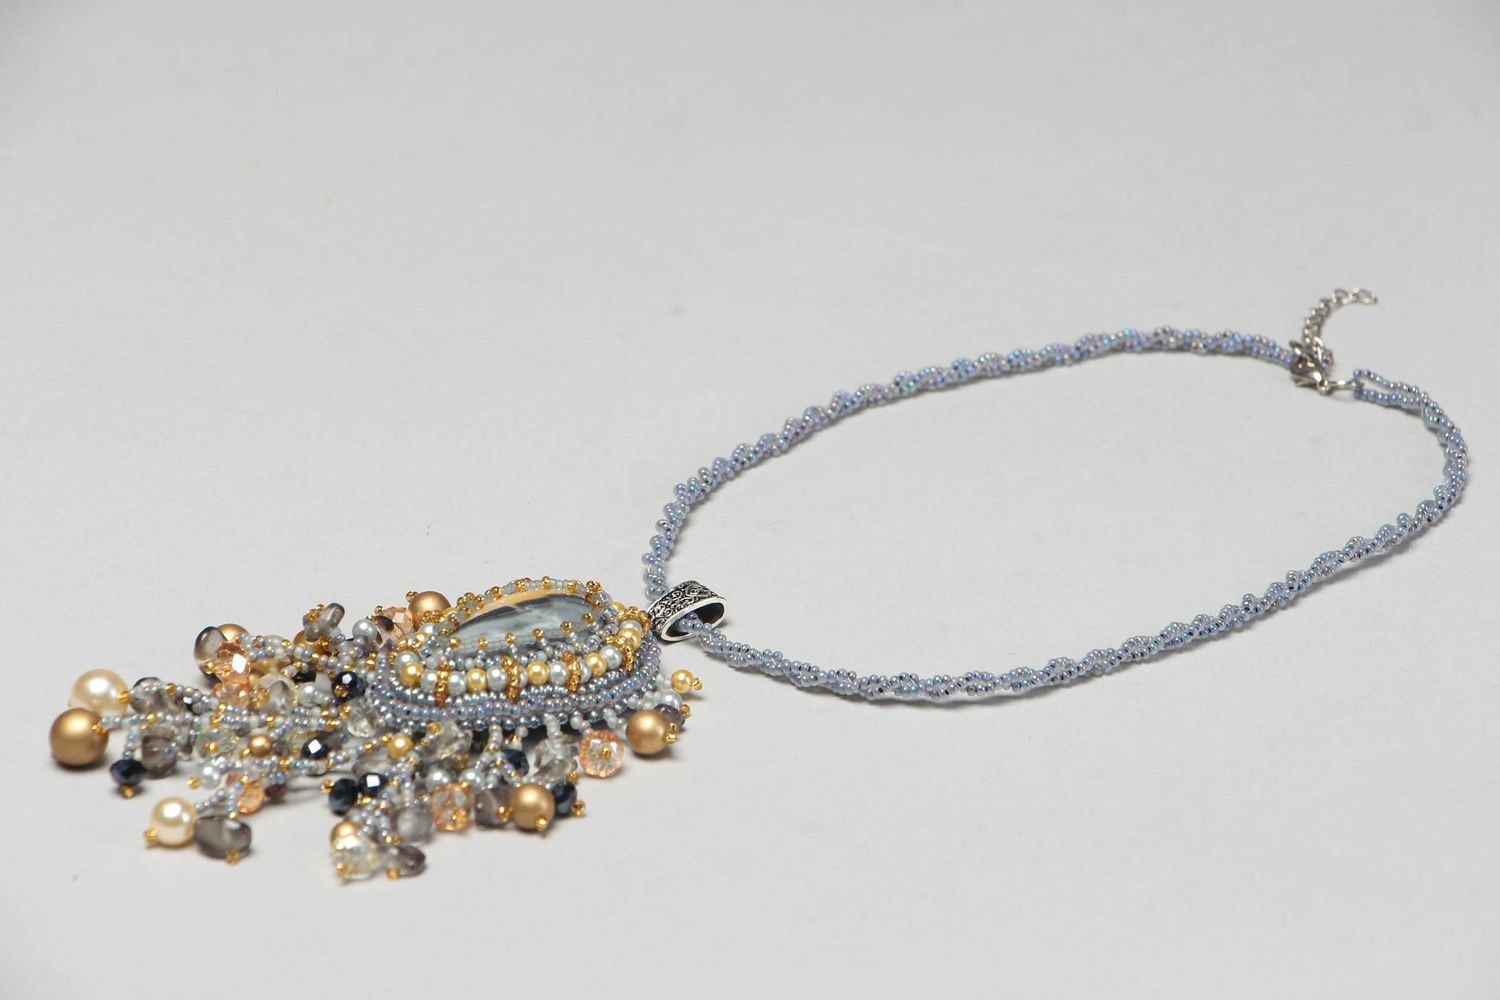 Beaded necklace with natural stones photo 3